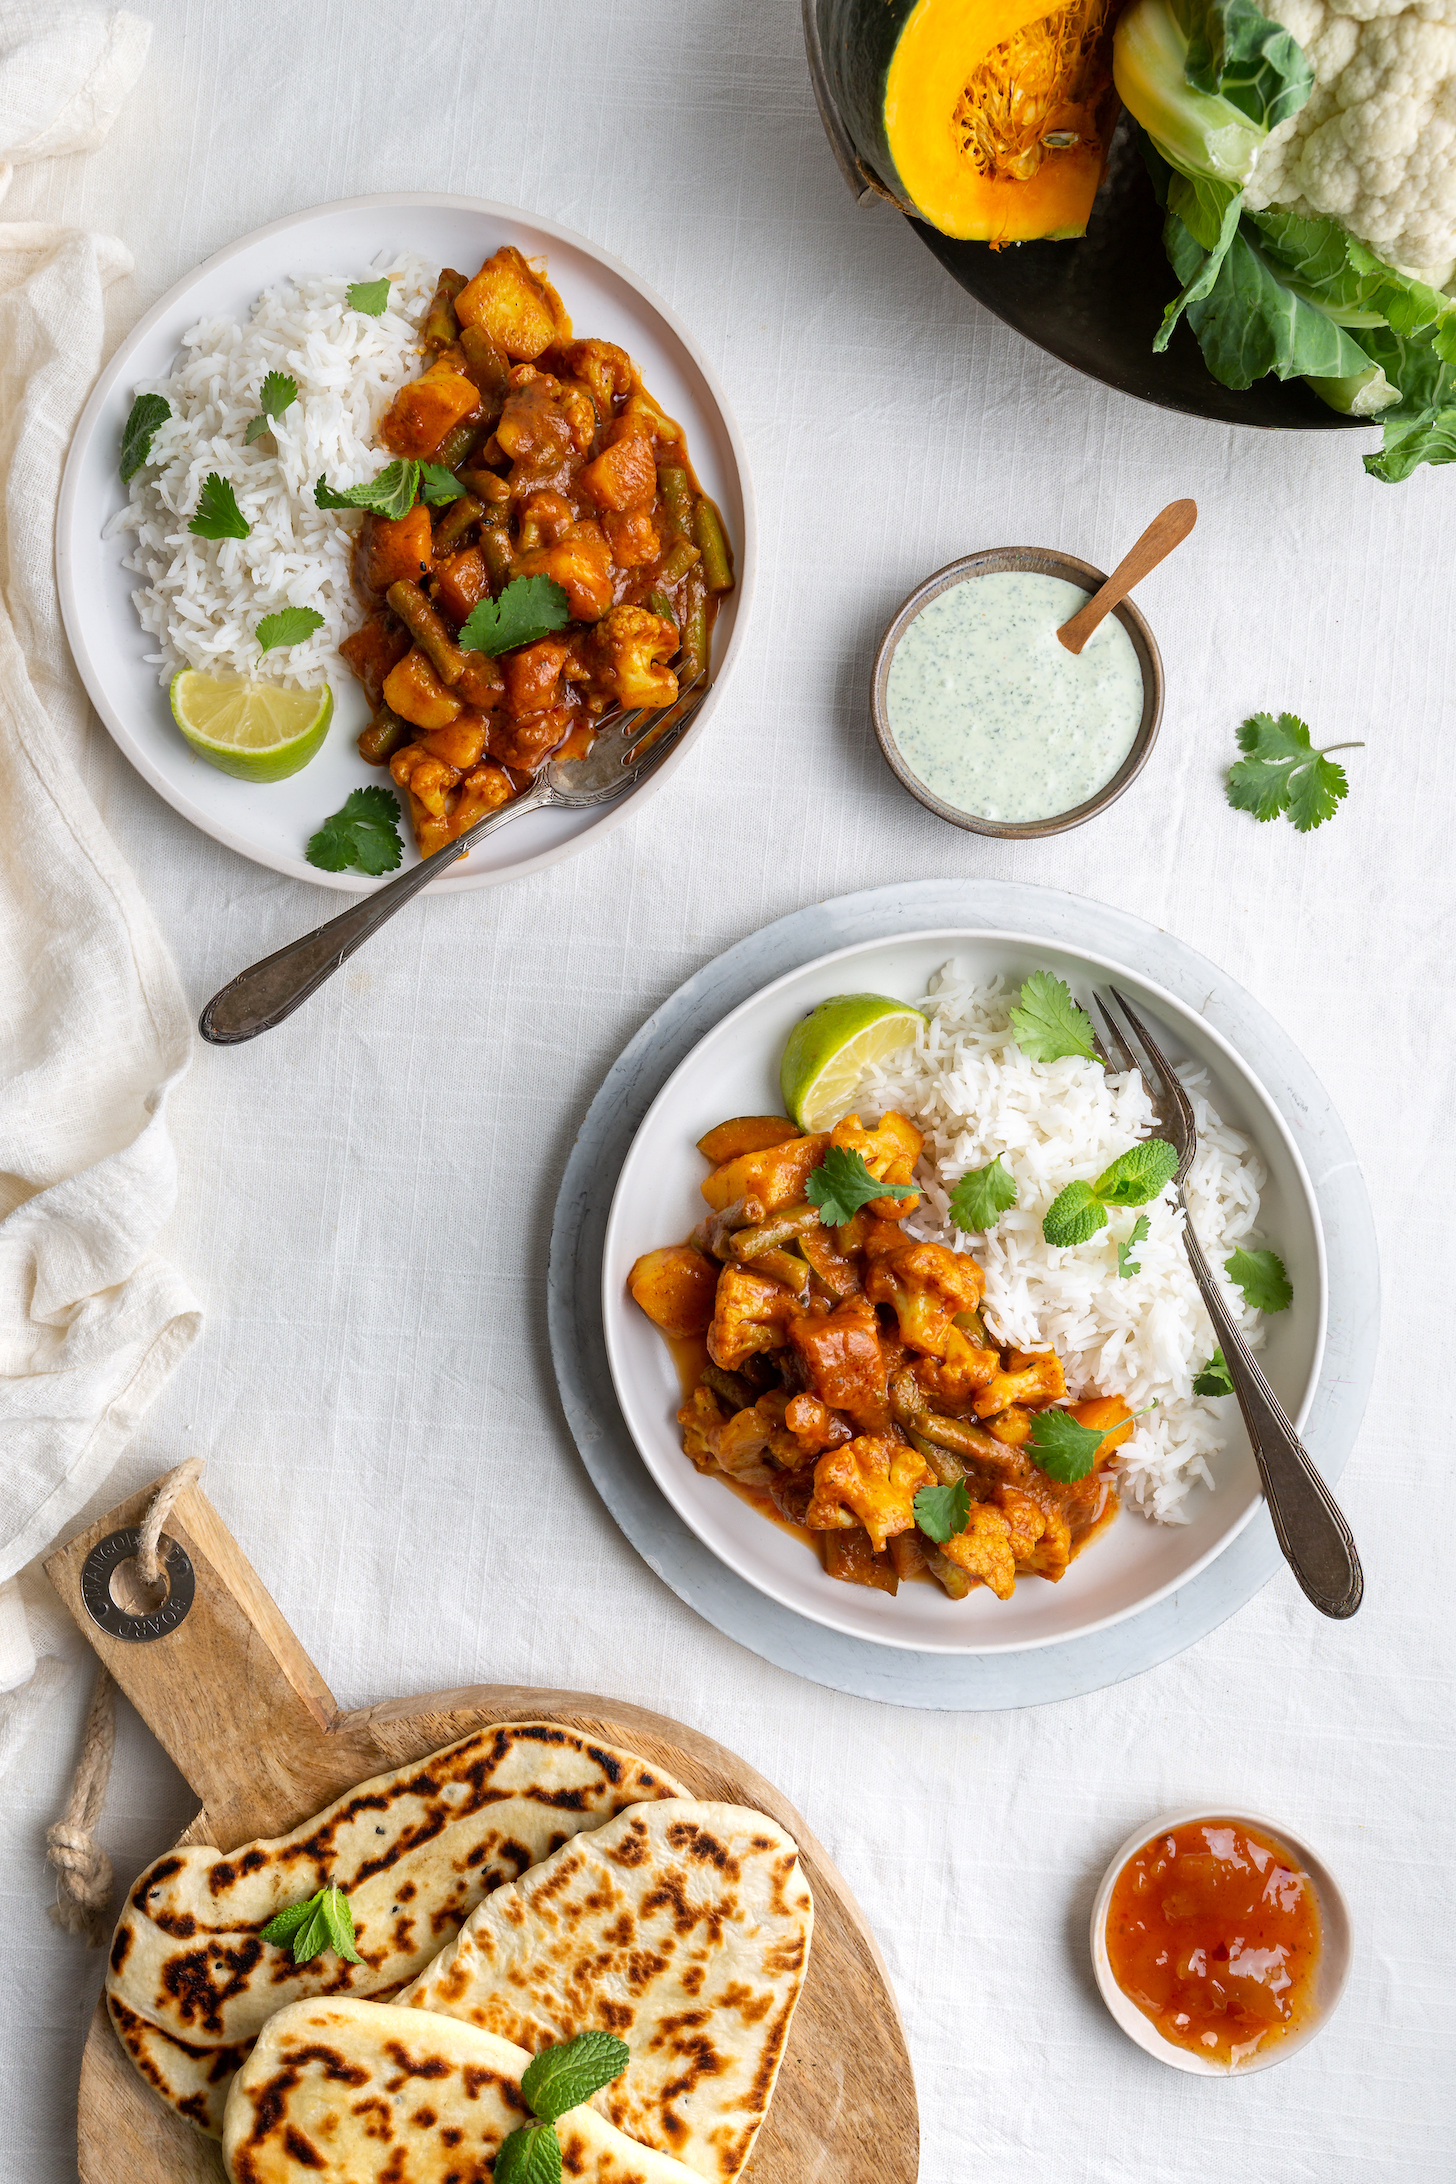 Top down view of a vegetarian, vegan Indian Balti curry with cauliflower and pumpkin served with raita, naan bread and mango chutney and basmati rice on a white background.